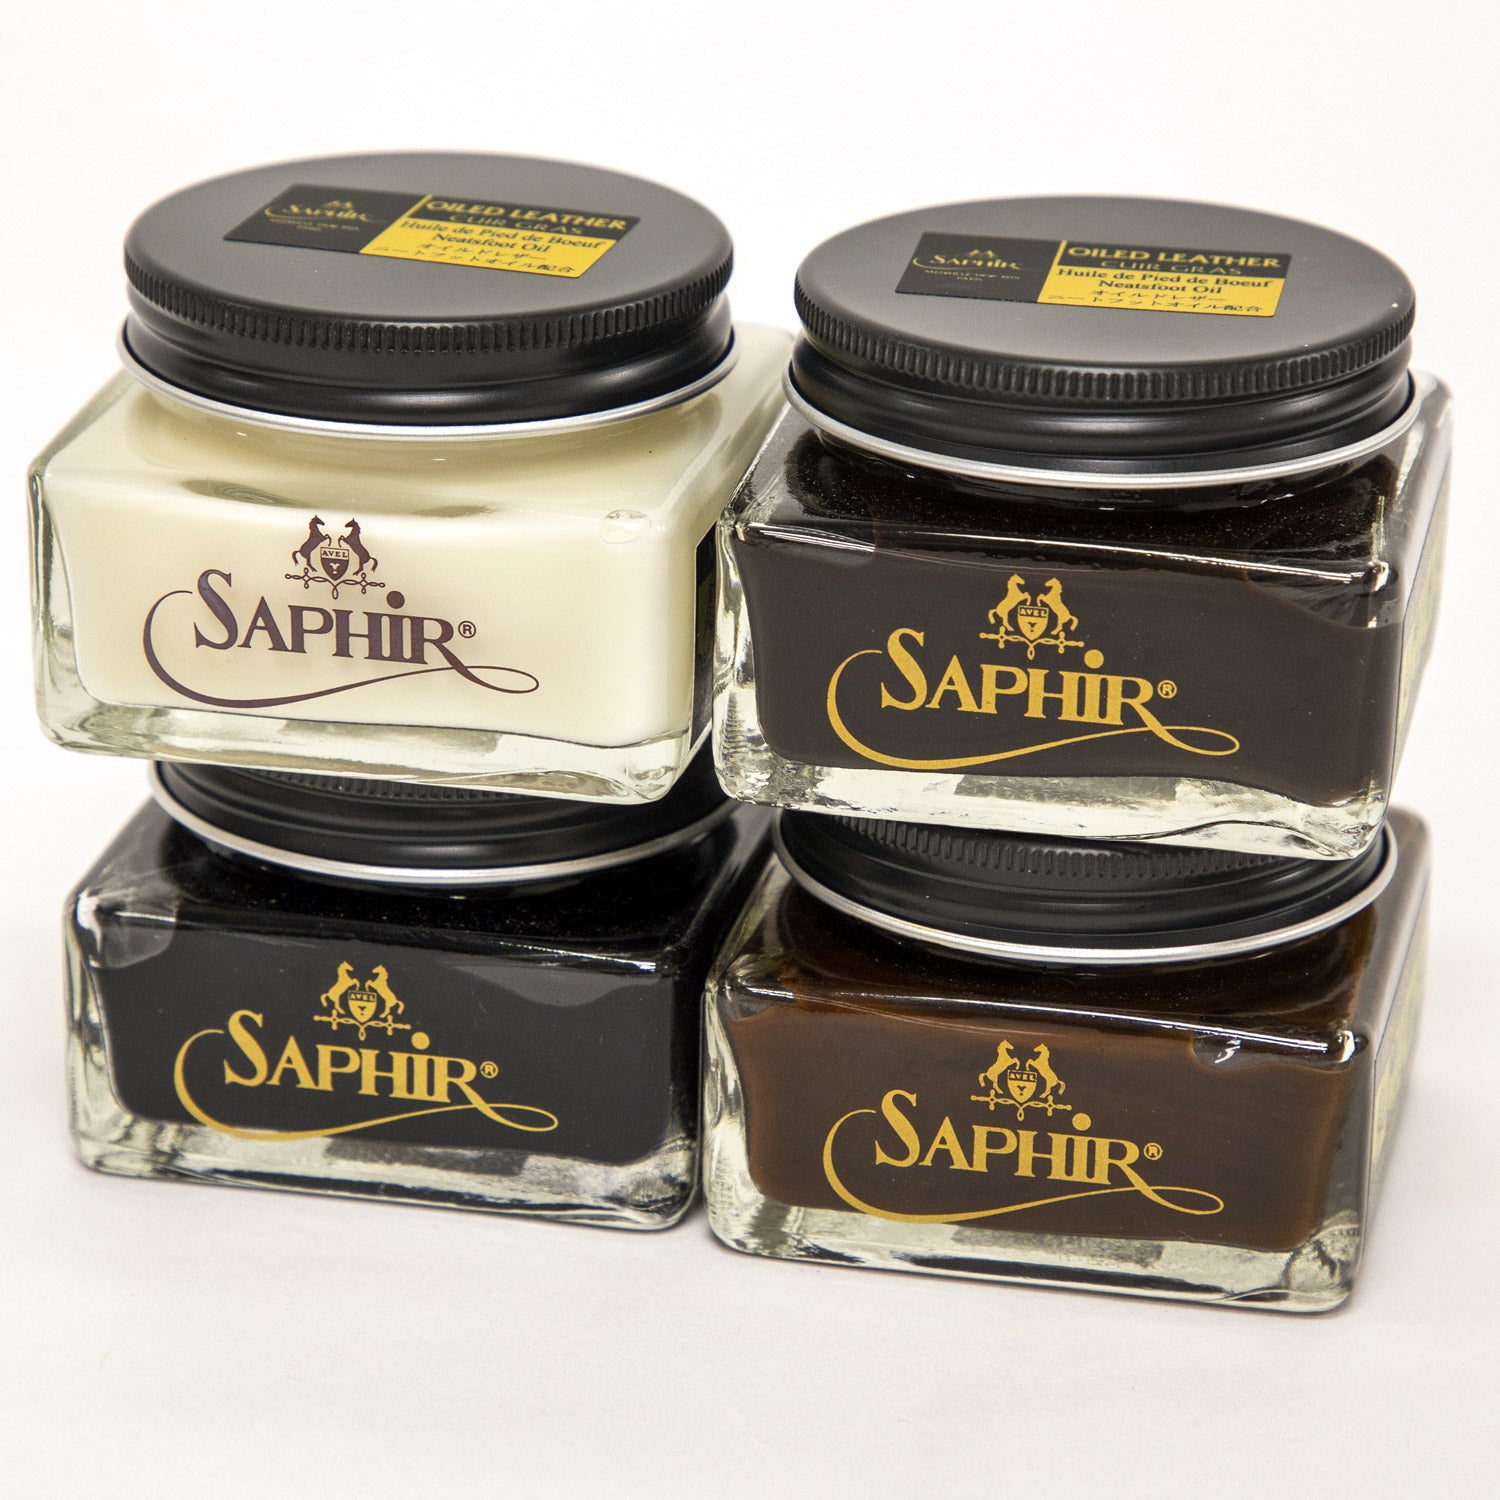 Four jars of Saphir Medaille d'Or Oiled Leather Cream for Chromexcel made by KirbyAllison.com in France.